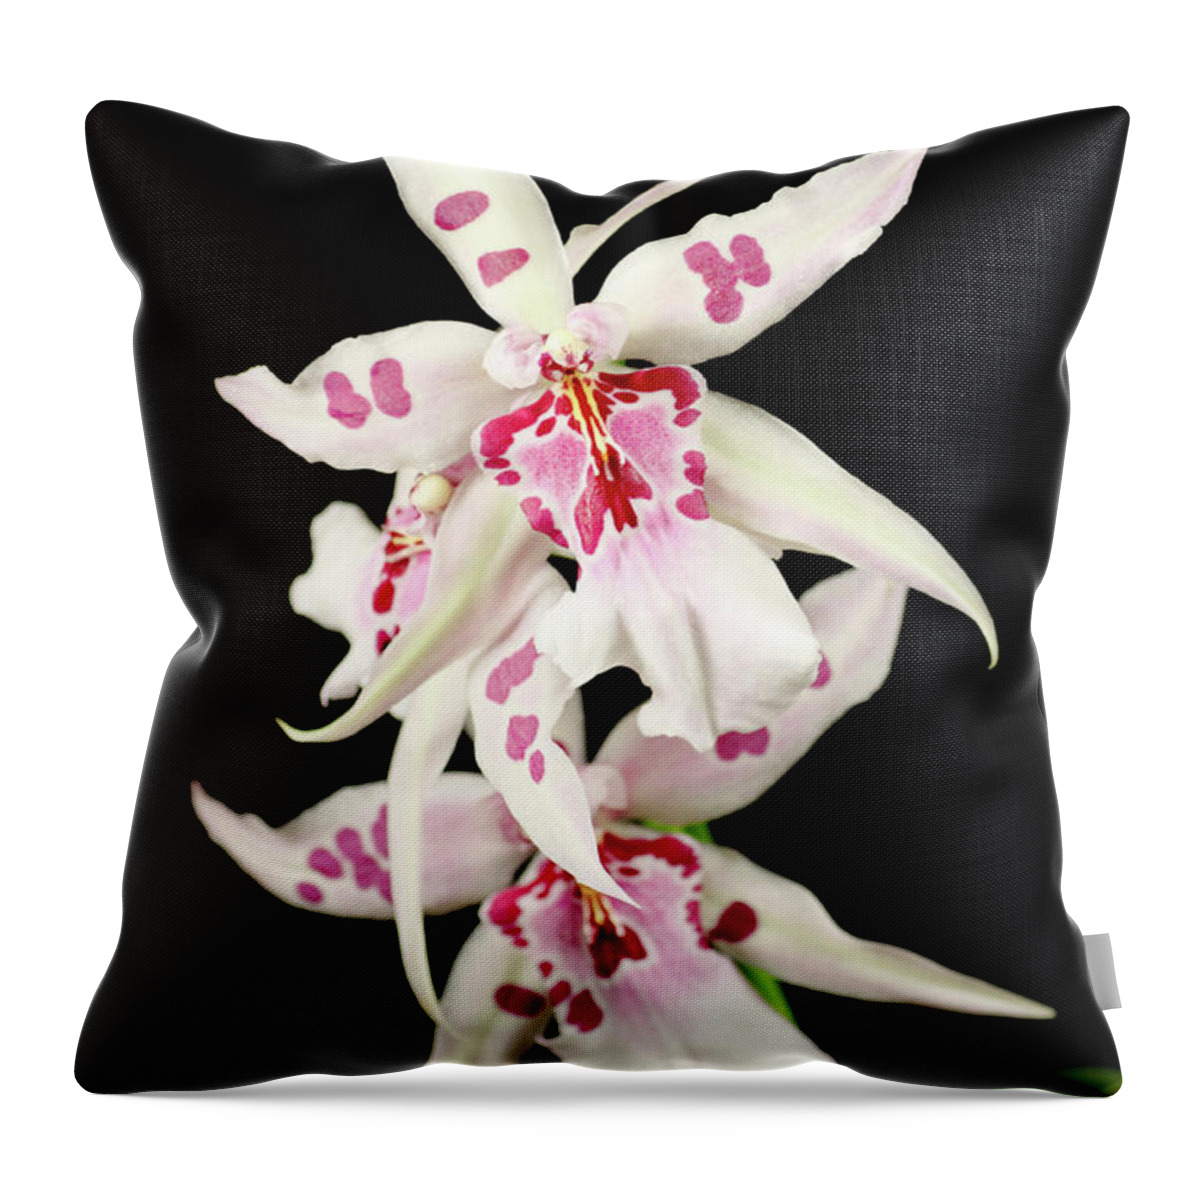 Black Color Throw Pillow featuring the photograph White Orchid Black Background by Imv